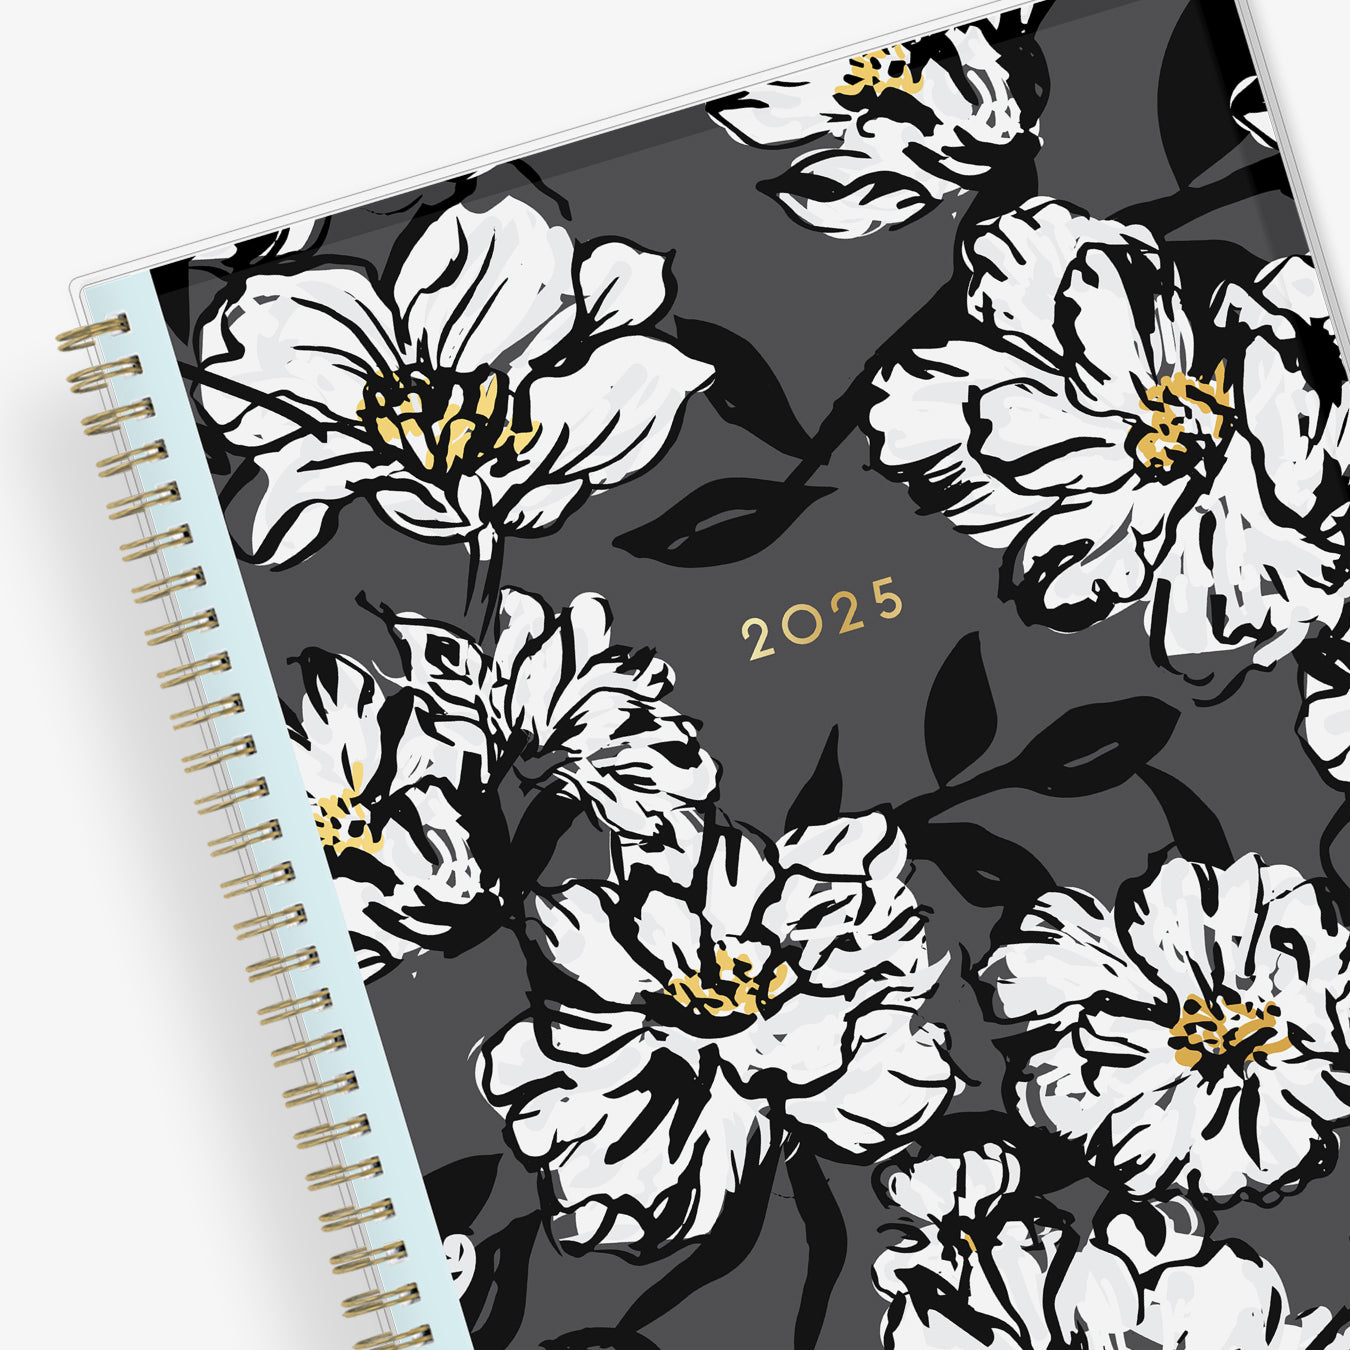 8.5x11 weekly monthly planner for January 2025 - December 2025 new year featuring silver twin wire-o binding, black/gray background, white florals and gold accents